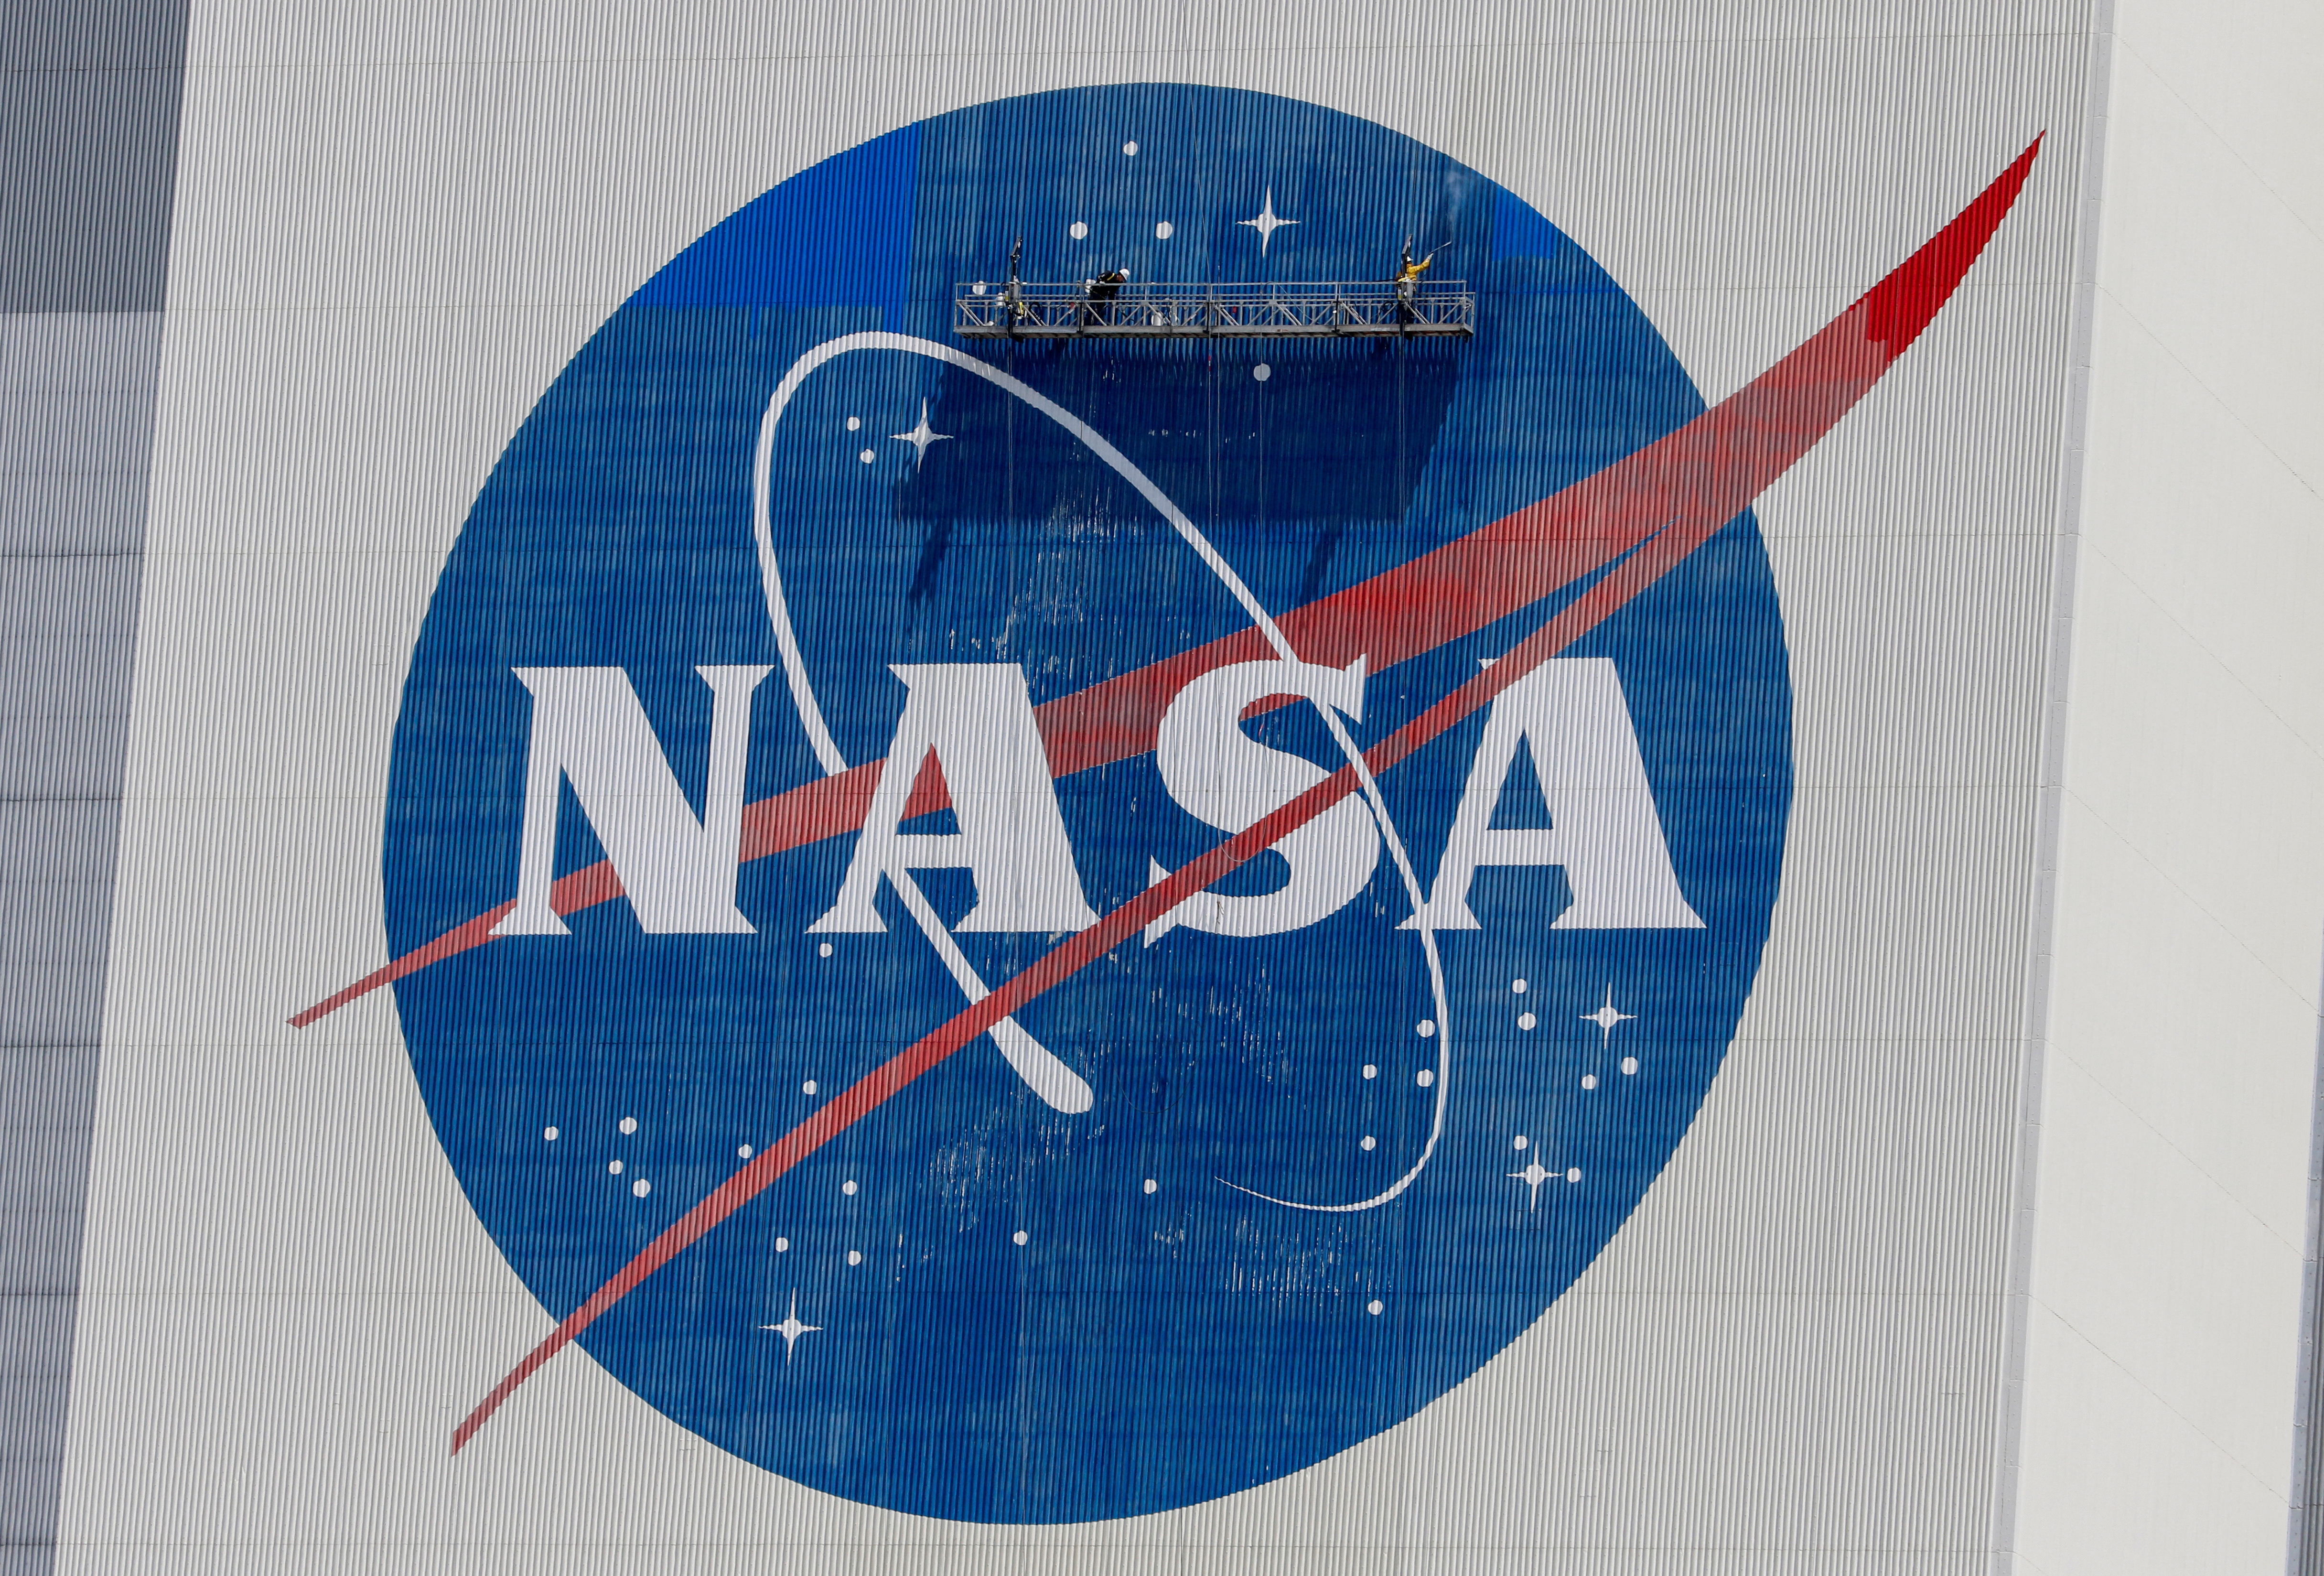 FILE PHOTO: Workers pressure wash the logo of NASA on the Vehicle Assembly Building before SpaceX will send two NASA astronauts to the International Space Station aboard its Falcon 9 rocket, at the Kennedy Space Center in Cape Canaveral, Florida, US, May 19, 2020 REUTERS/Joe Skipper/File Photo